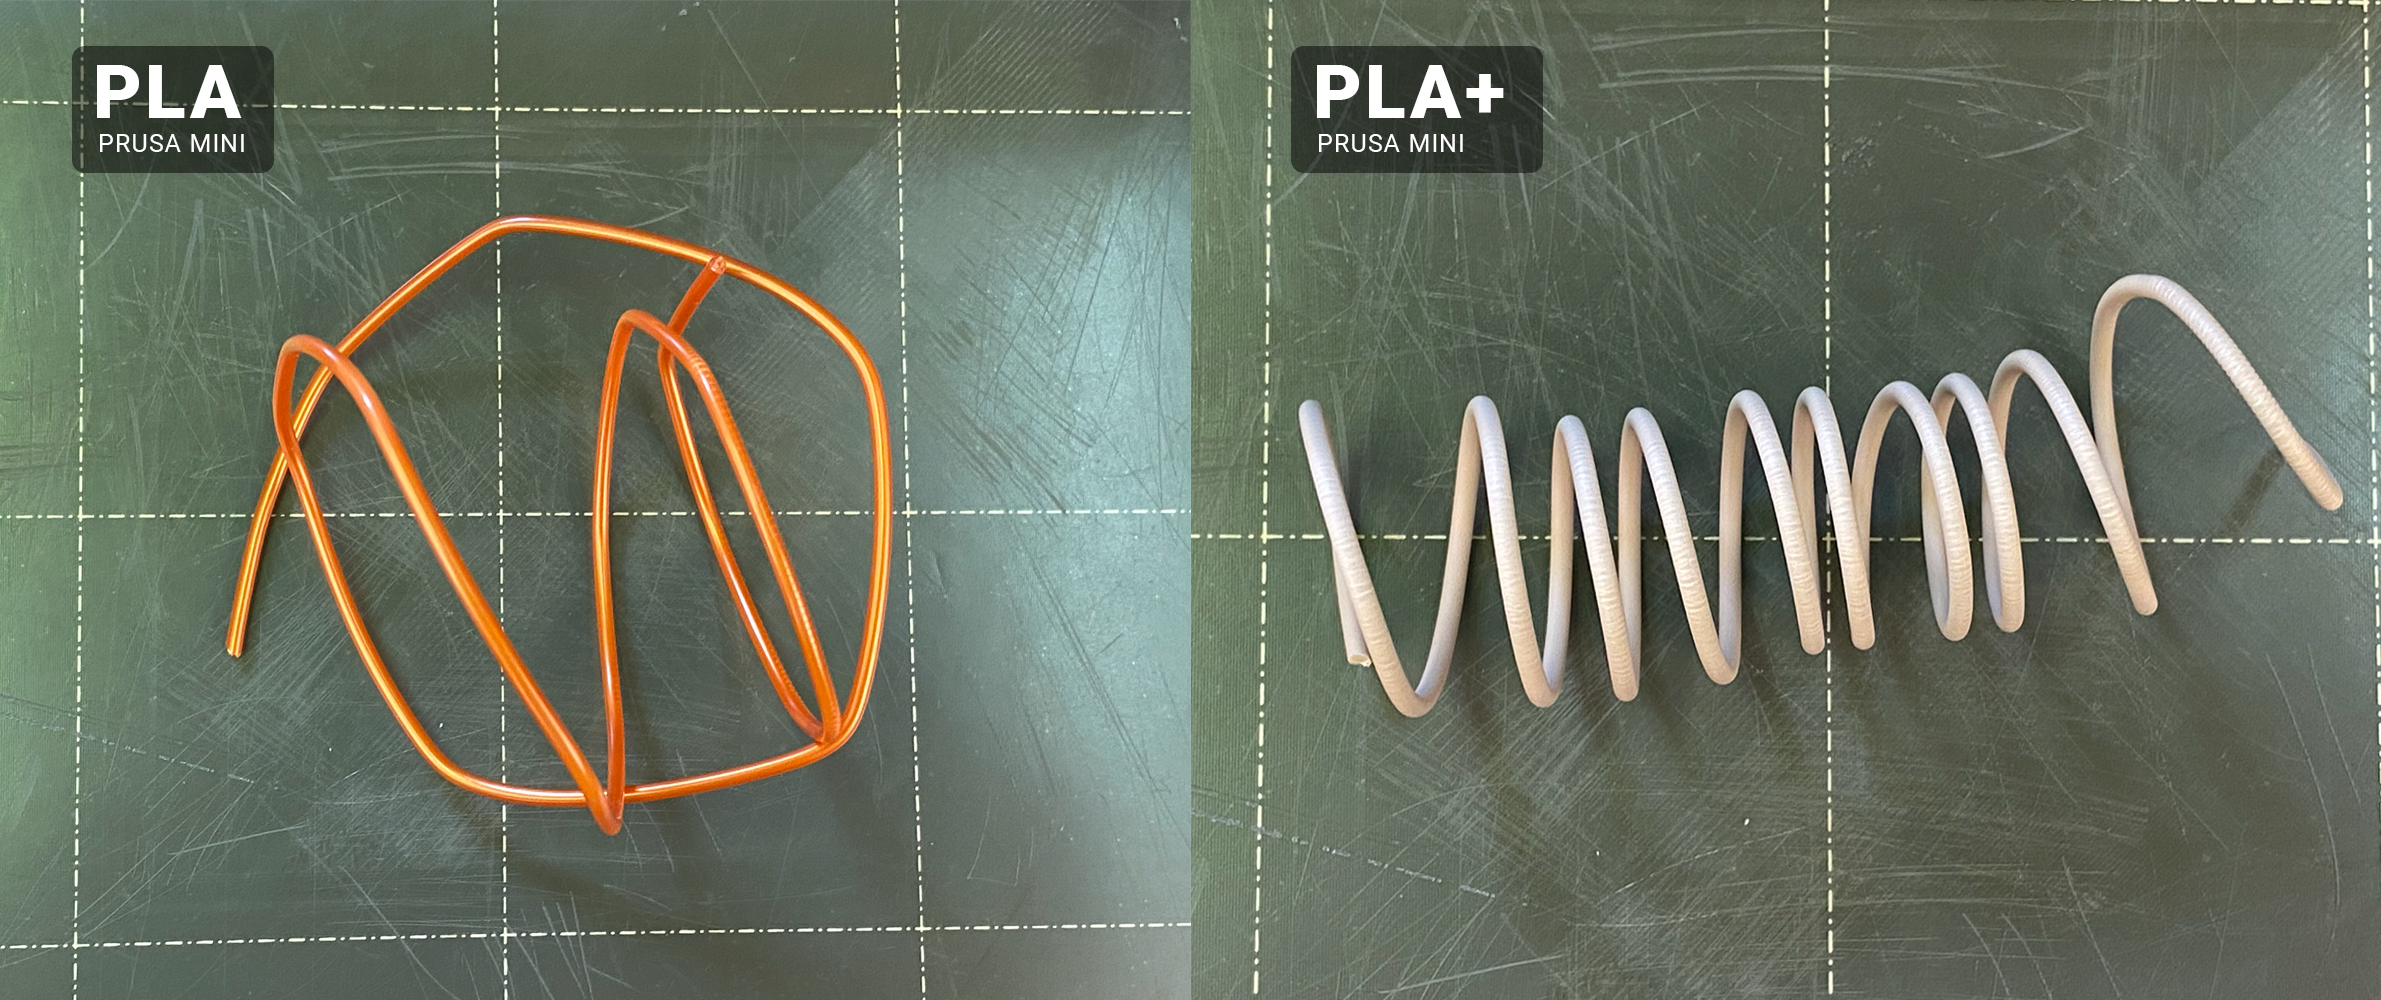 Difference between PLA and PLA+ filament